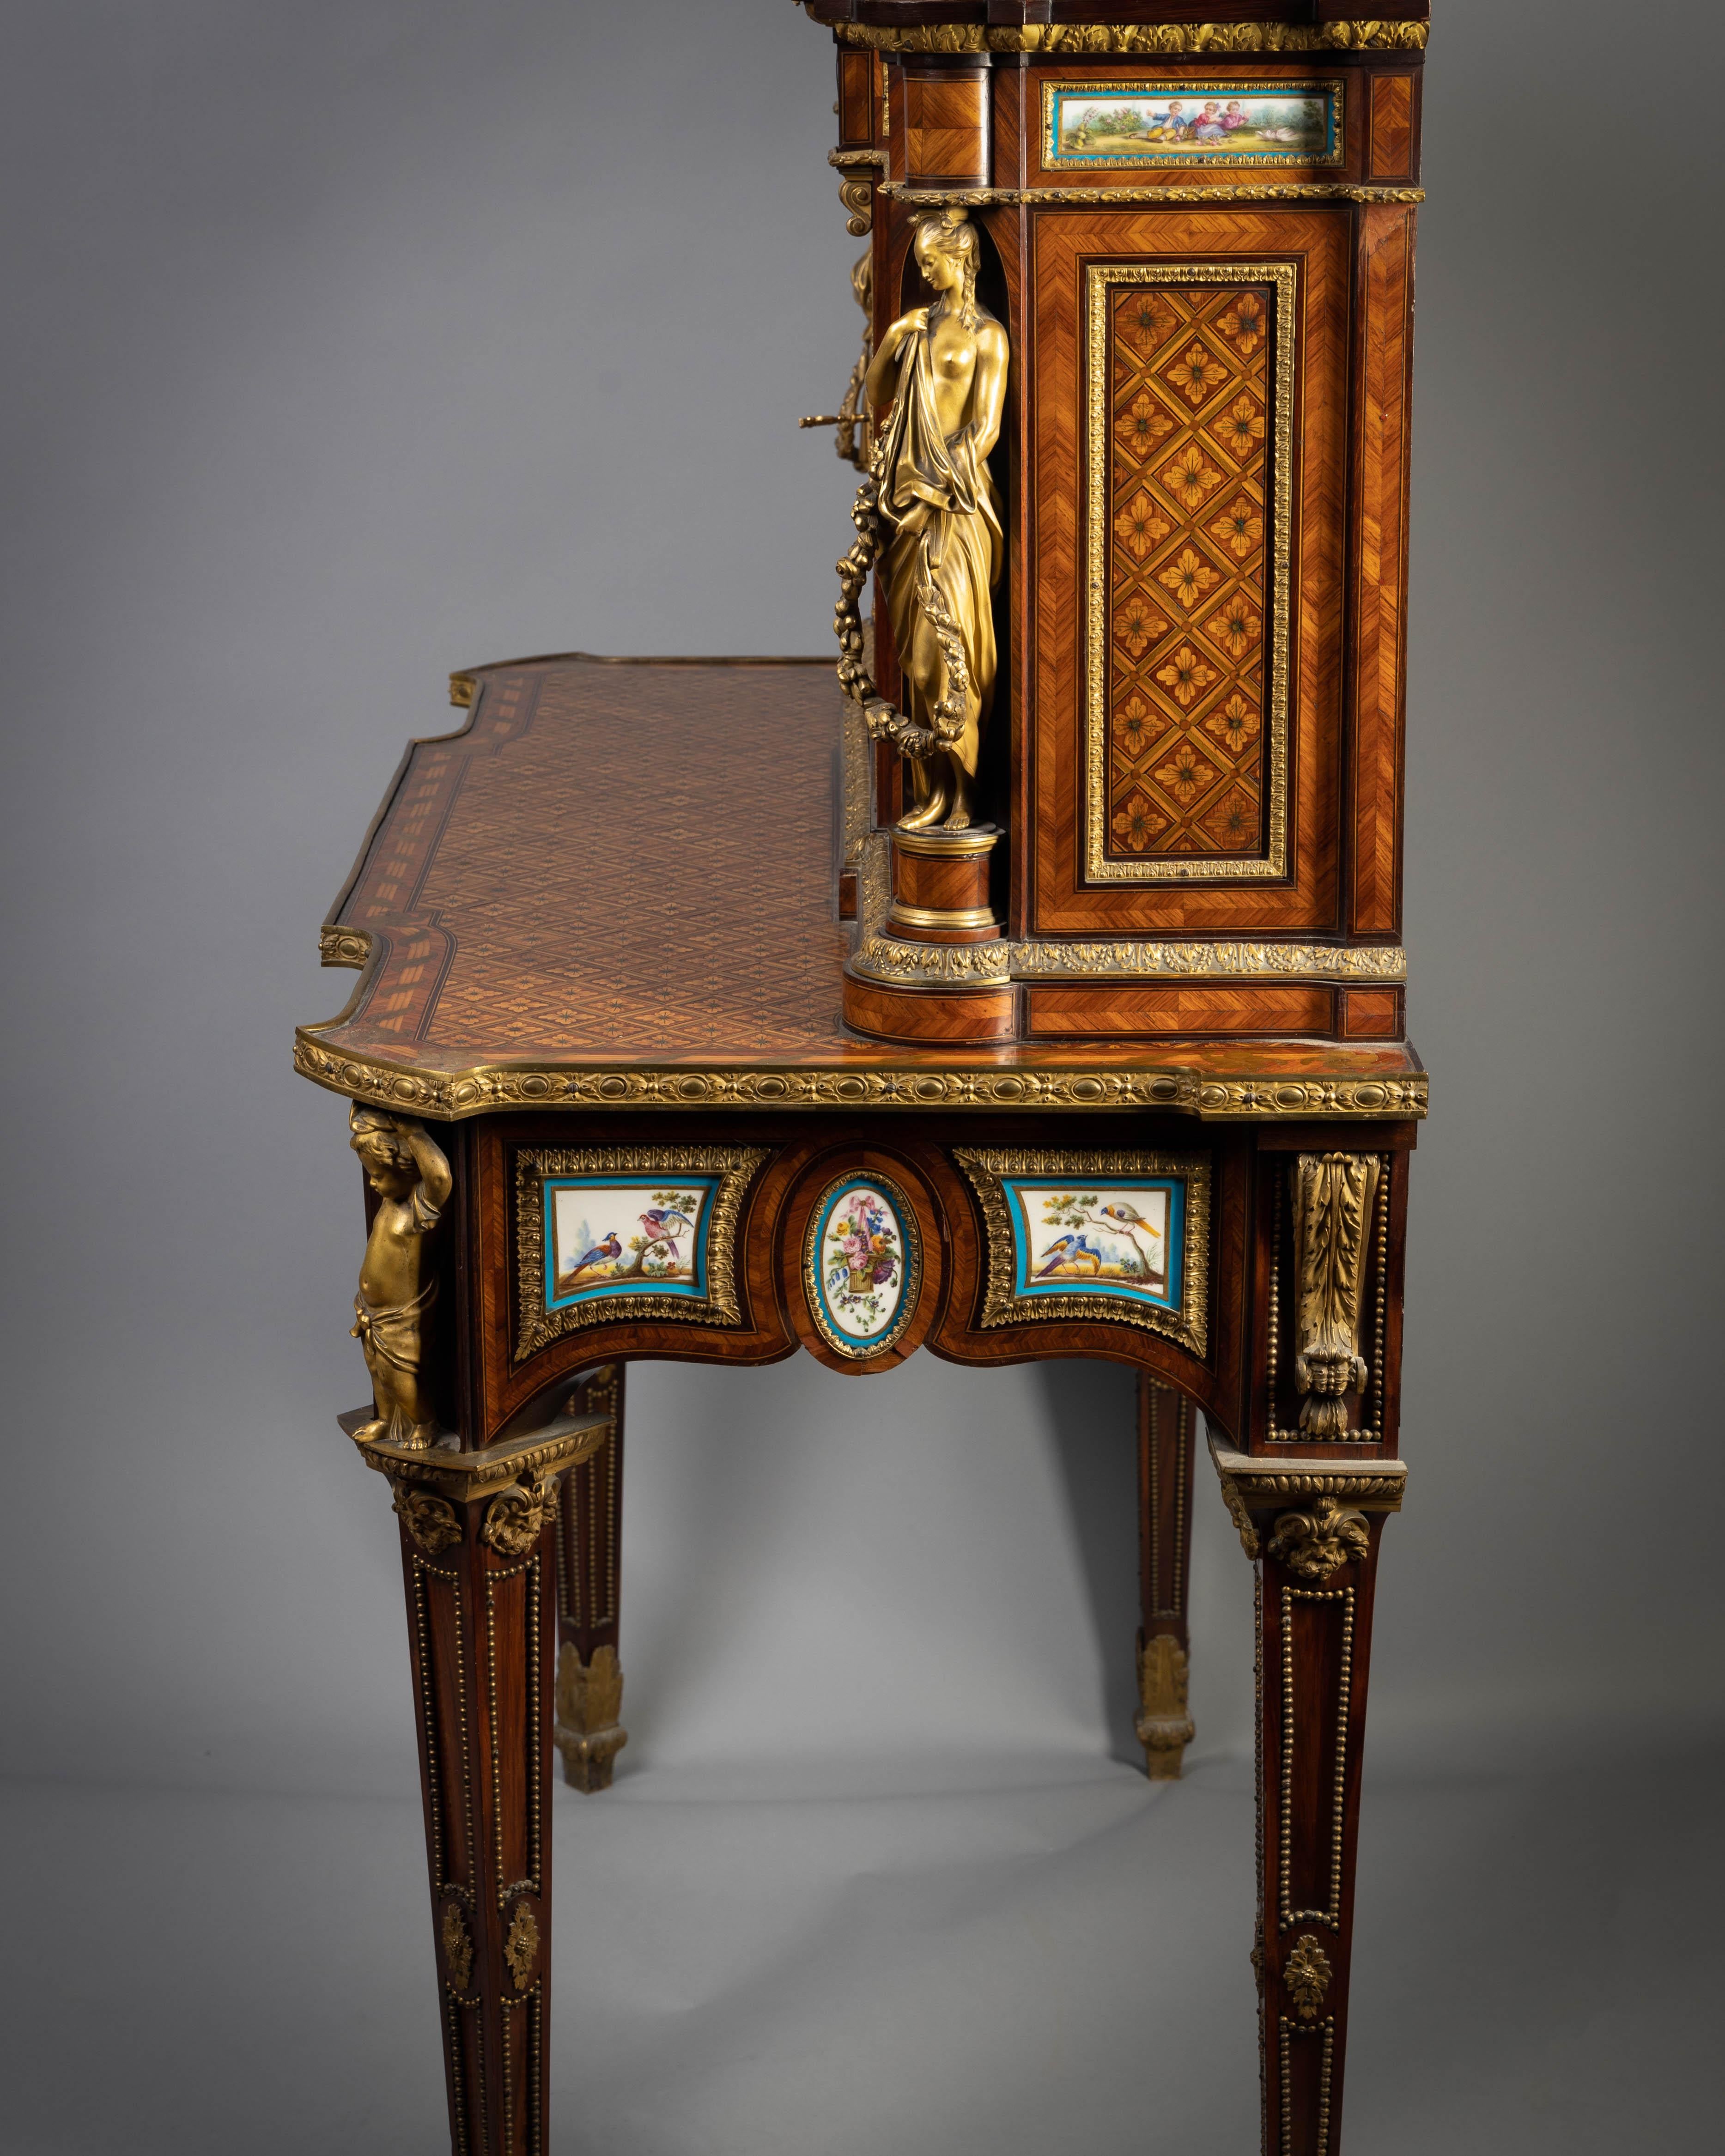 A fine Napoleon III Sevres style porcelain and ormolu-mounted tulipwood and parquetry Bureau De Dame, circa 1860

With stepped rectangular superstructure with three shaped rectangular ochre and red marble tops, above a central panel inset with